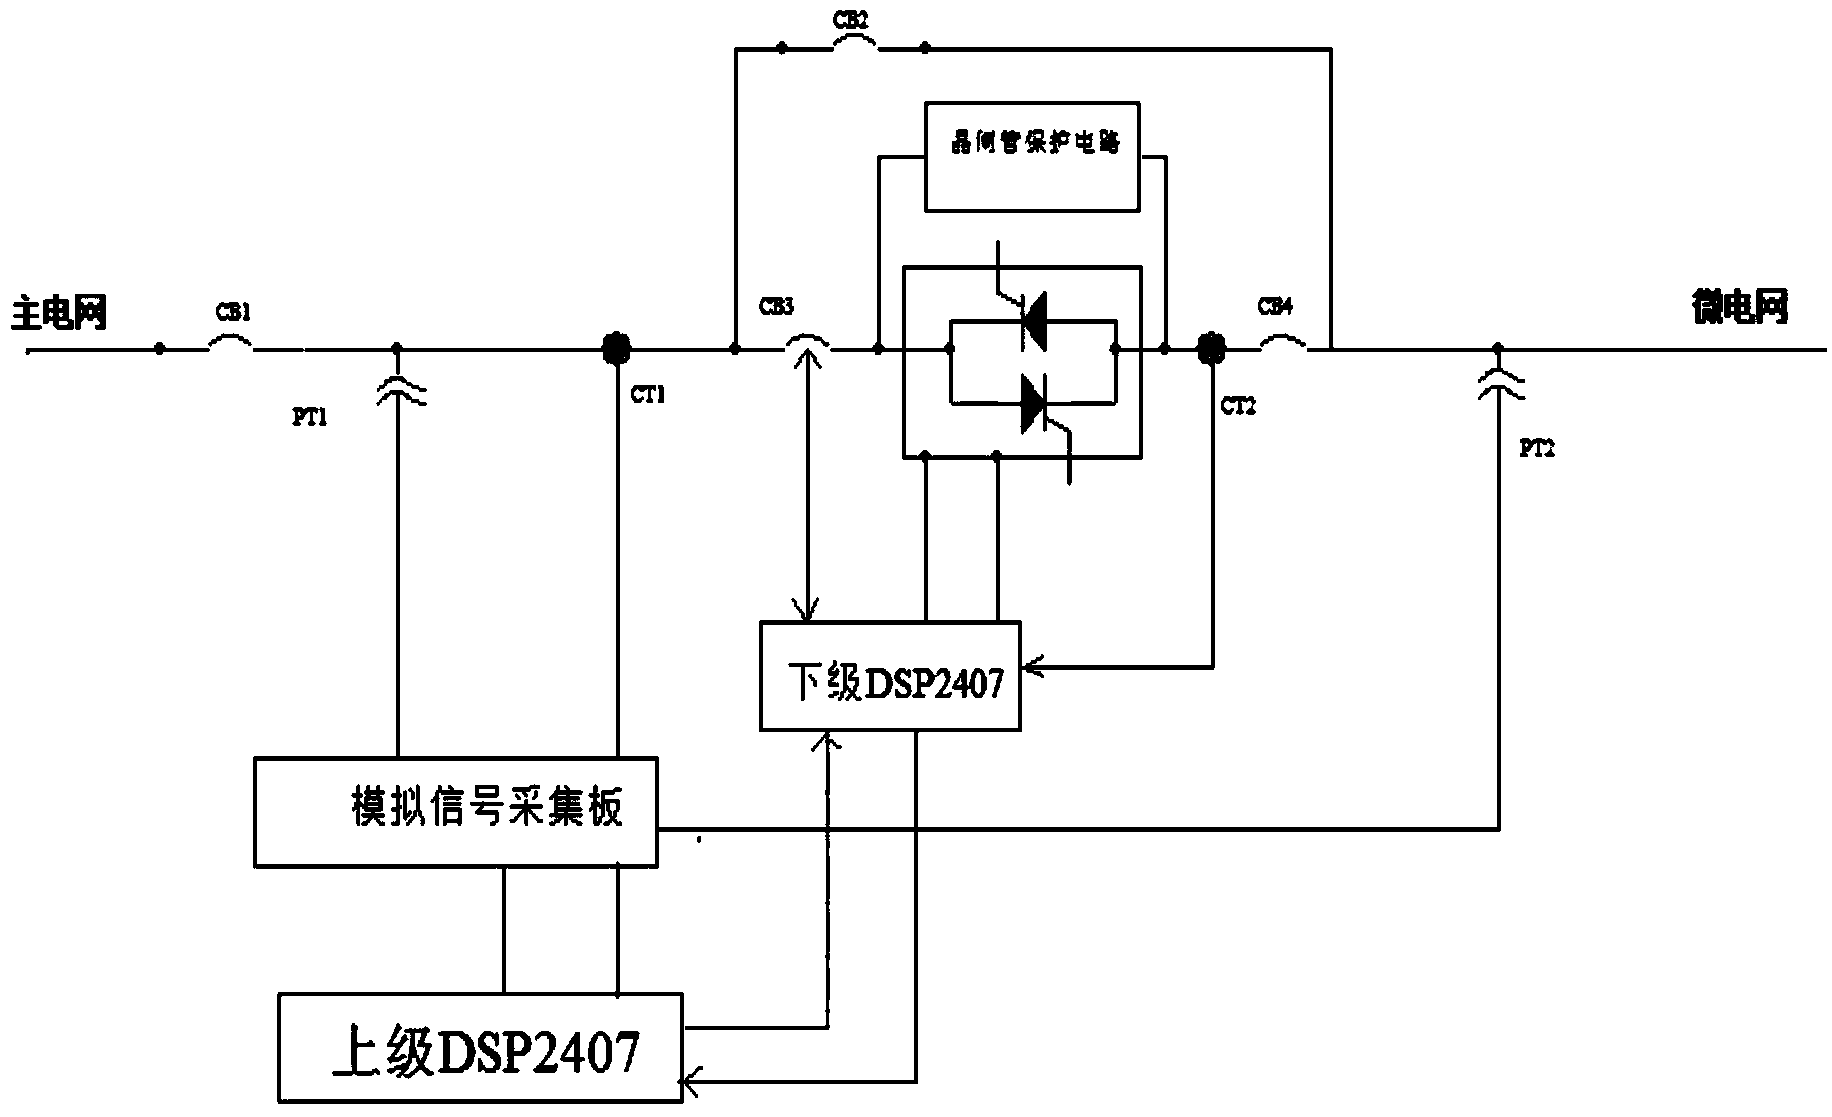 Driving control system of intelligent isolation switch of micro power grid